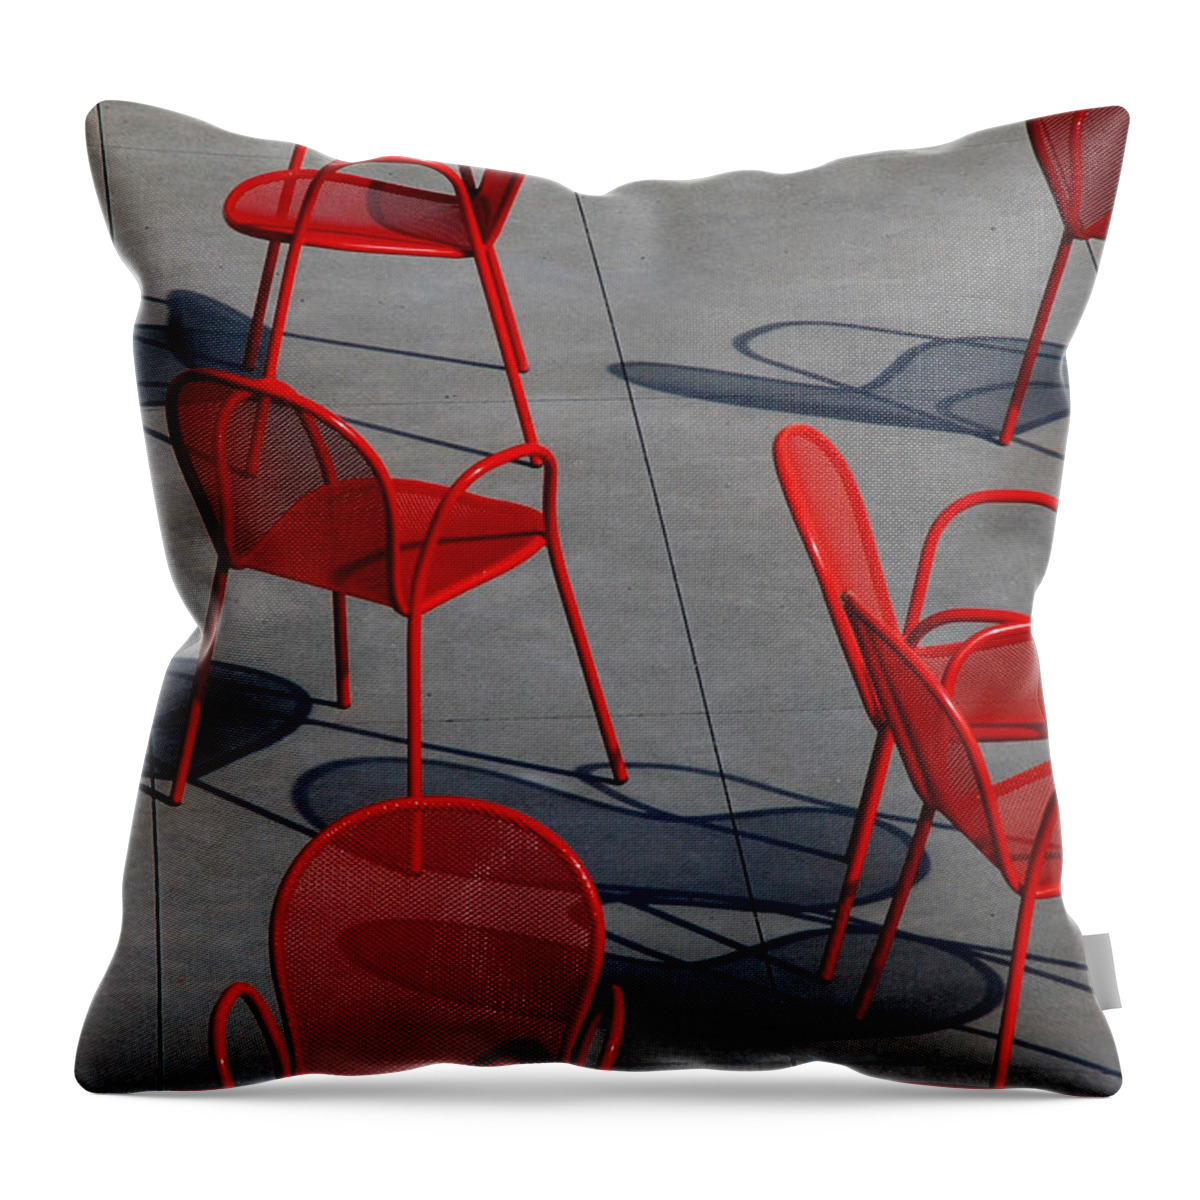 Urban Throw Pillow featuring the photograph Red Chairs by Stuart Allen